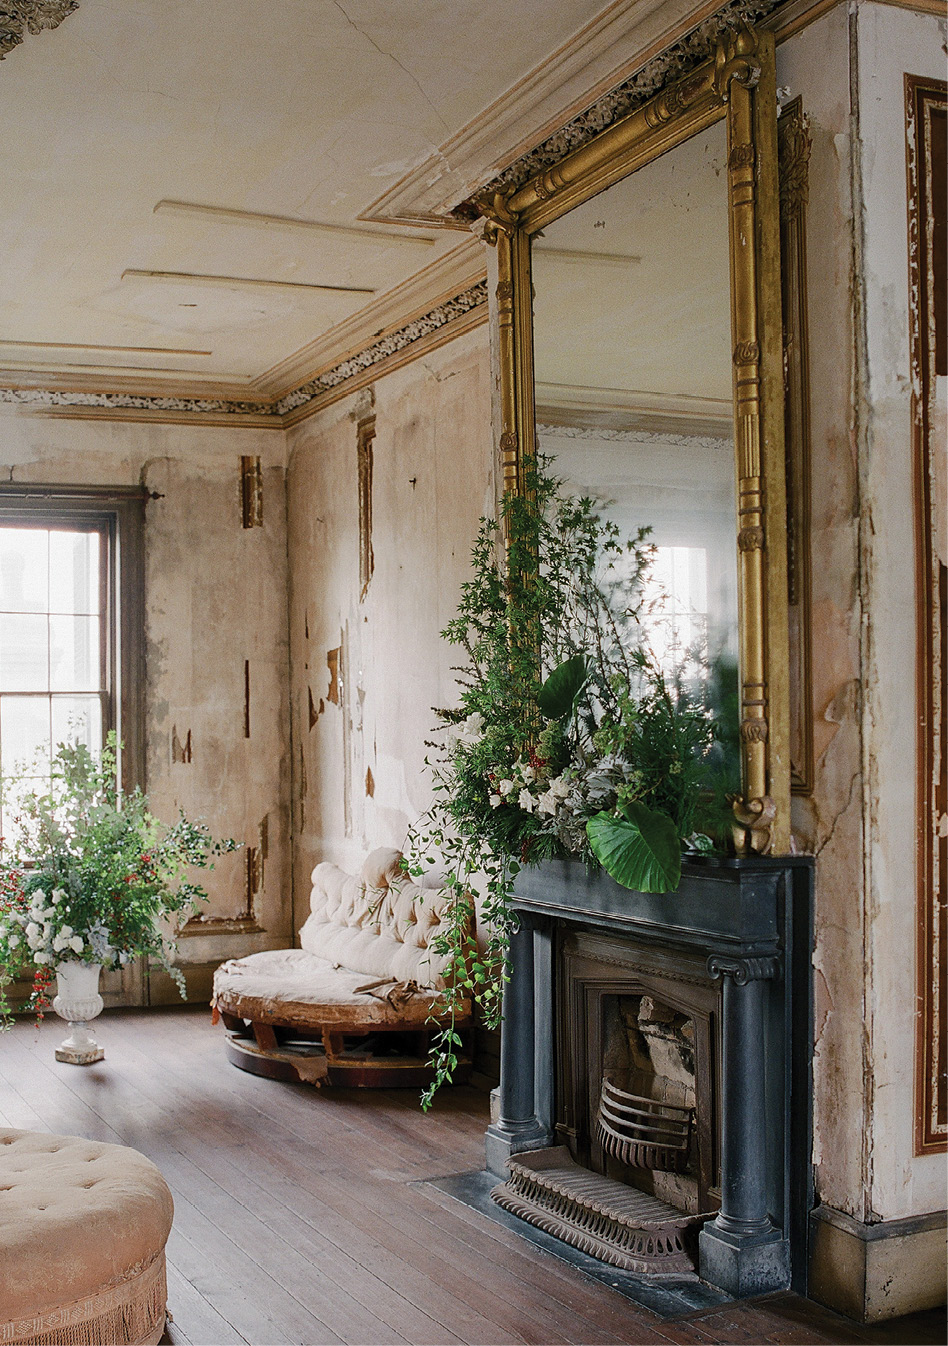 In the Aiken-Rhett’s second-floor drawing room, a mantel bursts with Japanese maple, trailing ivy, spray roses, dusty miller, nandina, elephant ears, and more.